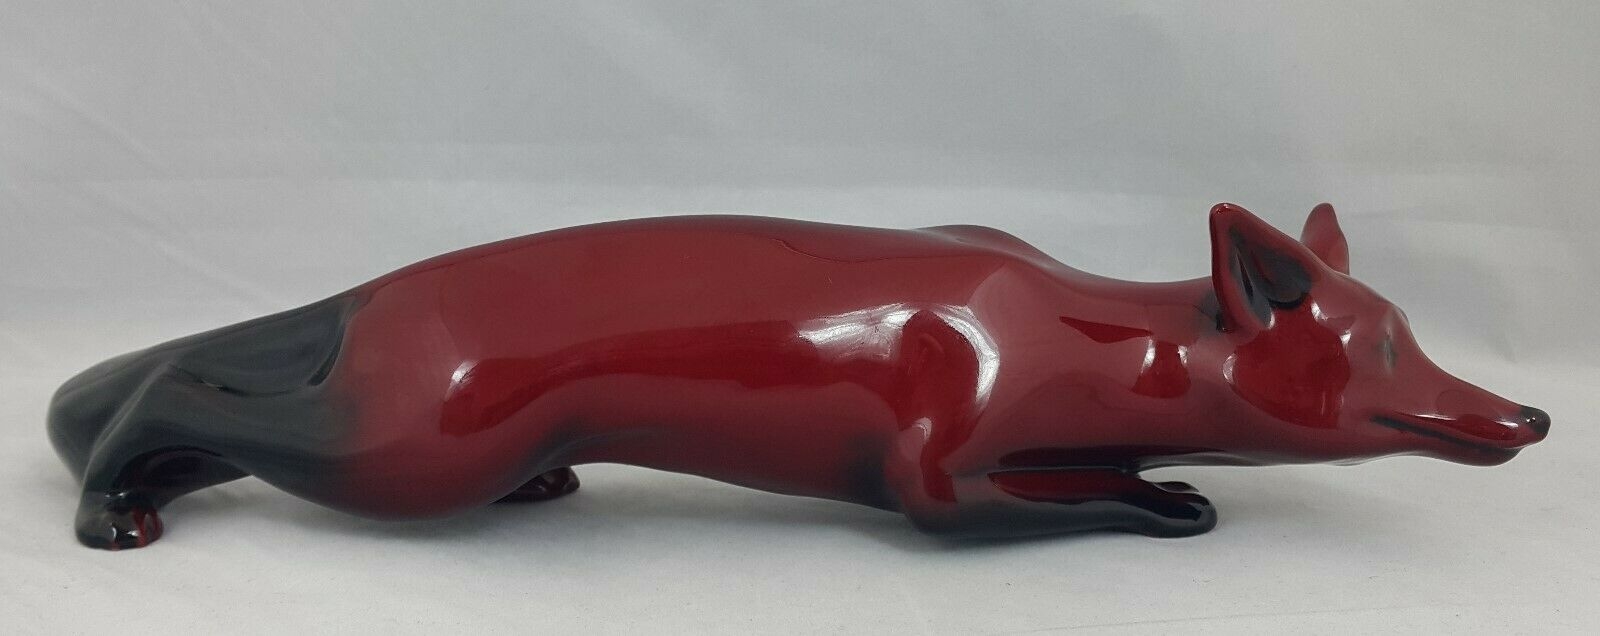 Royal Doulton Flambe Stalking Fox HN147A-1 (29) Large signed by Noke – Amazing Antiques Etc. – Amazing Antiques